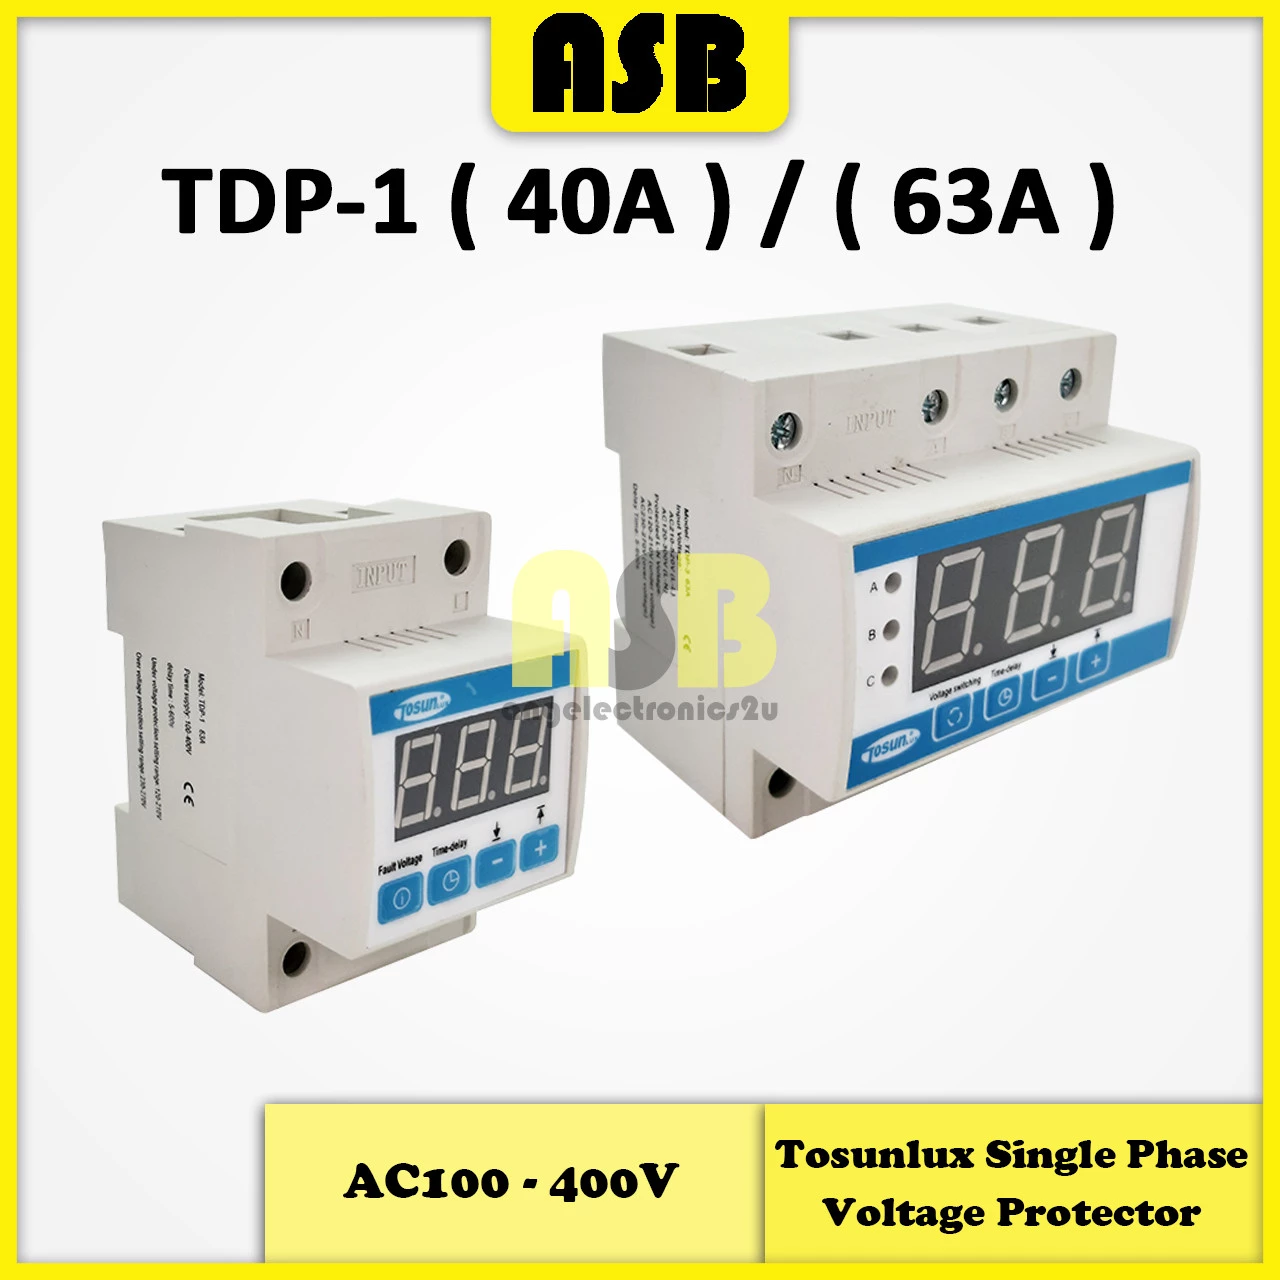 (1pc) Tosunlux Single Phase Voltage Protector TDP-1 ( AC100V - 400V ) ( 40A / 63A )